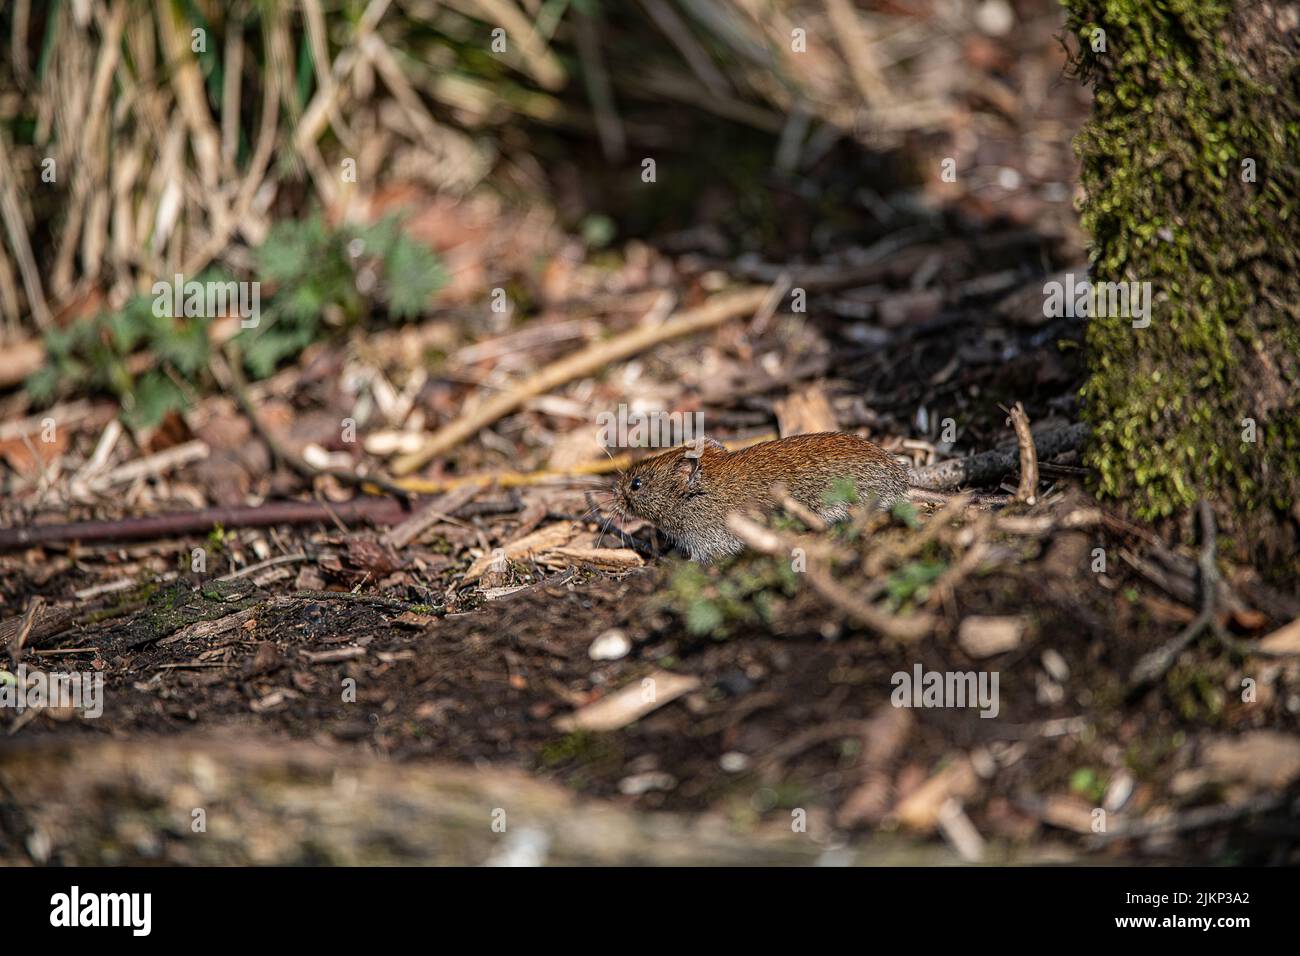 A selective focus of an adorable common vole in a field Stock Photo